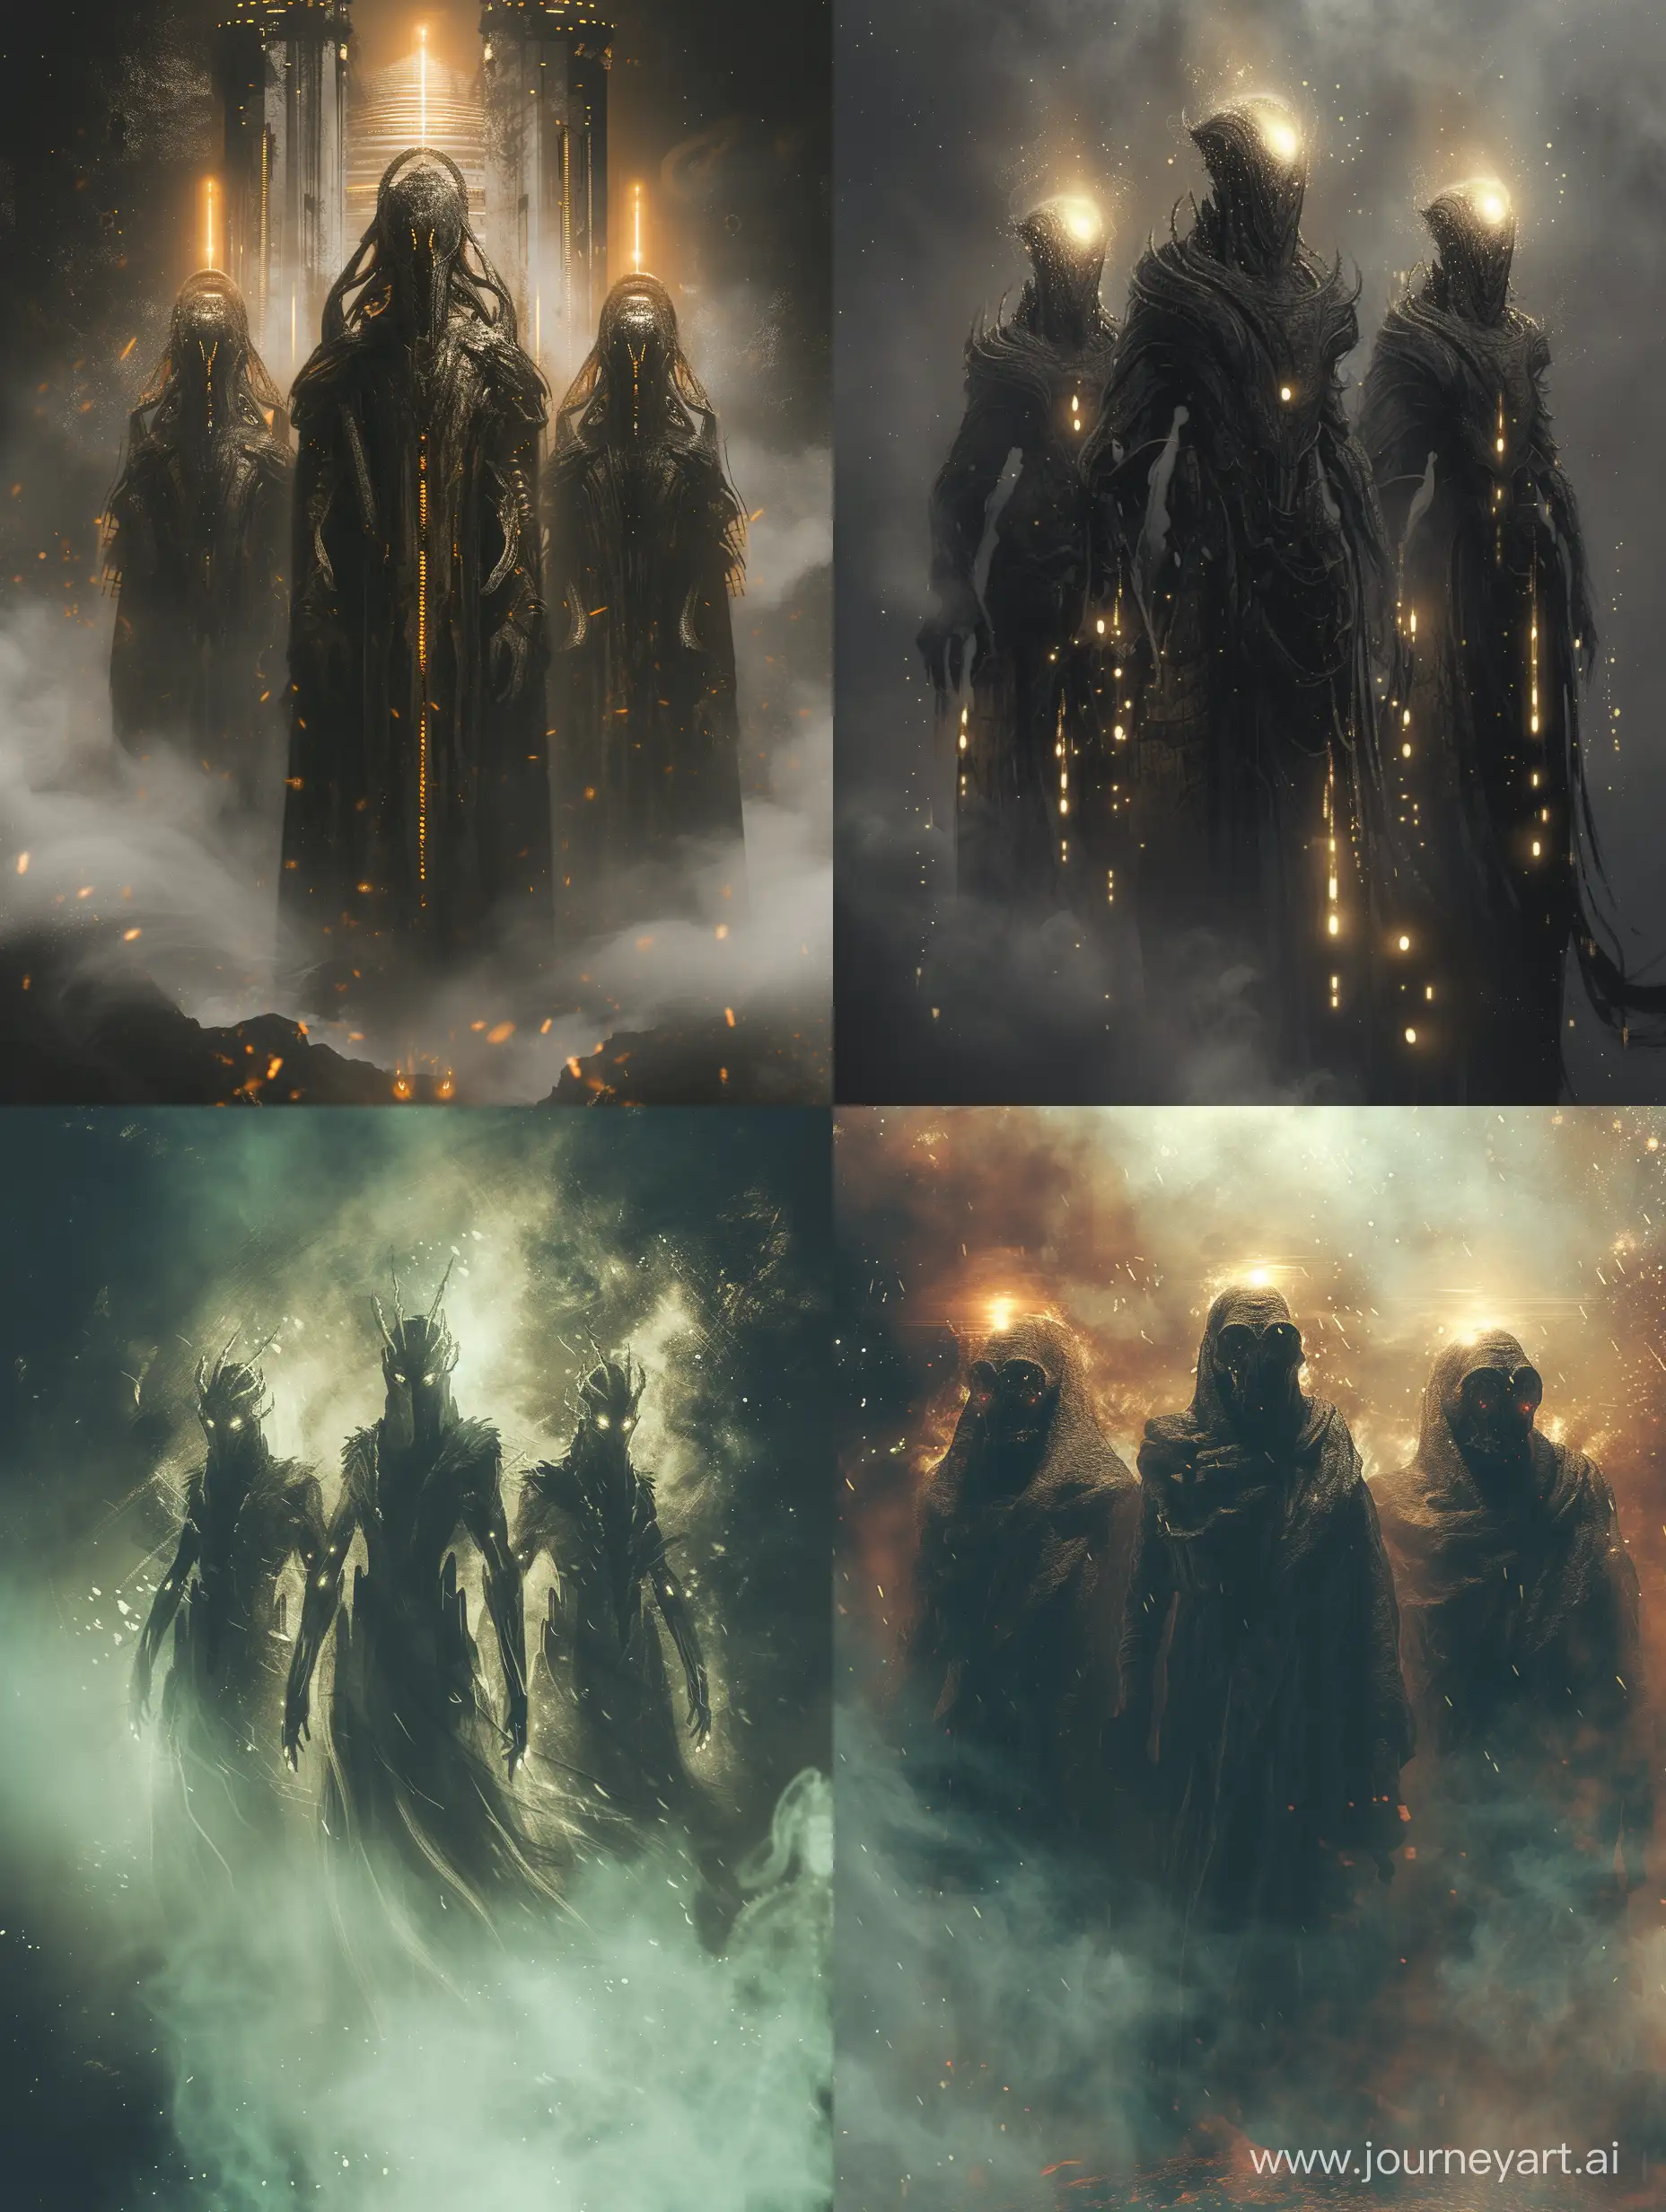 Create a digital art piece featuring a trio of cosmic elder gods standing in a dark and moody atmosphere. The gods should be full-height with a smoky and grungy effect. The style should be bold and unique, with a focus on capturing the cosmic and otherworldly nature of these beings. Glowy lights